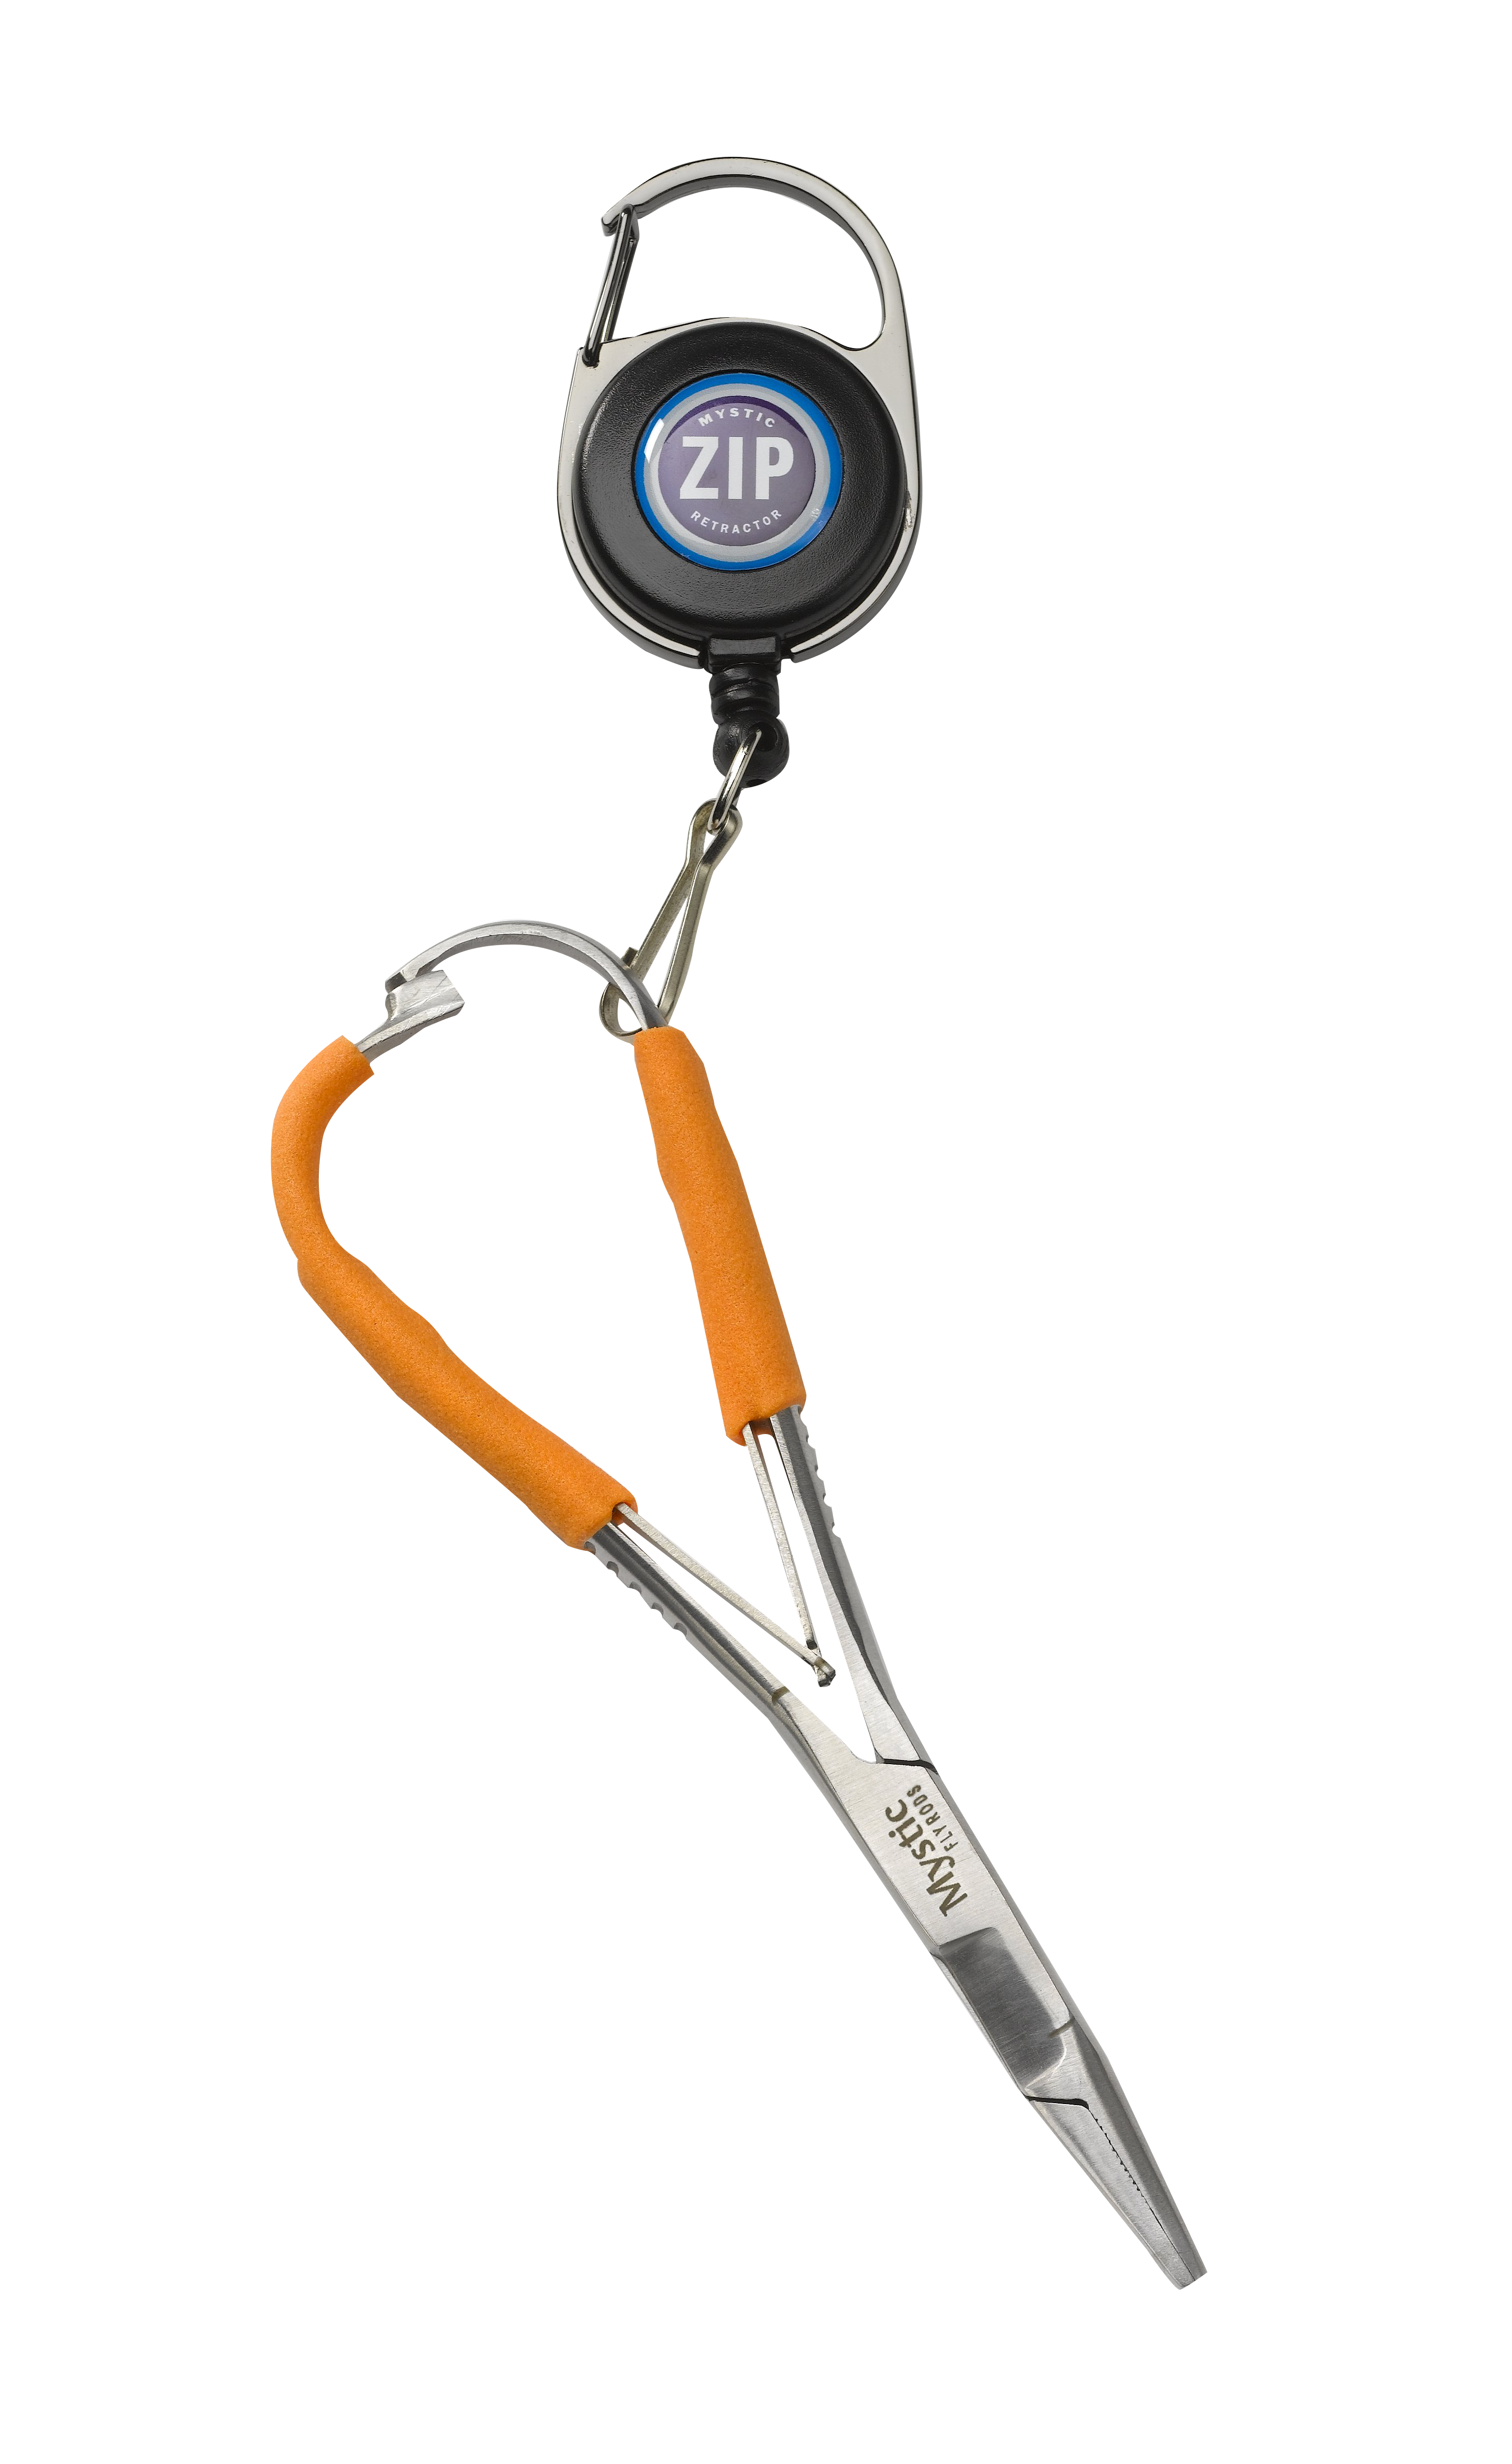 Premium Fly Fishing Zinger Retractor - Keep Your Tools Handy and